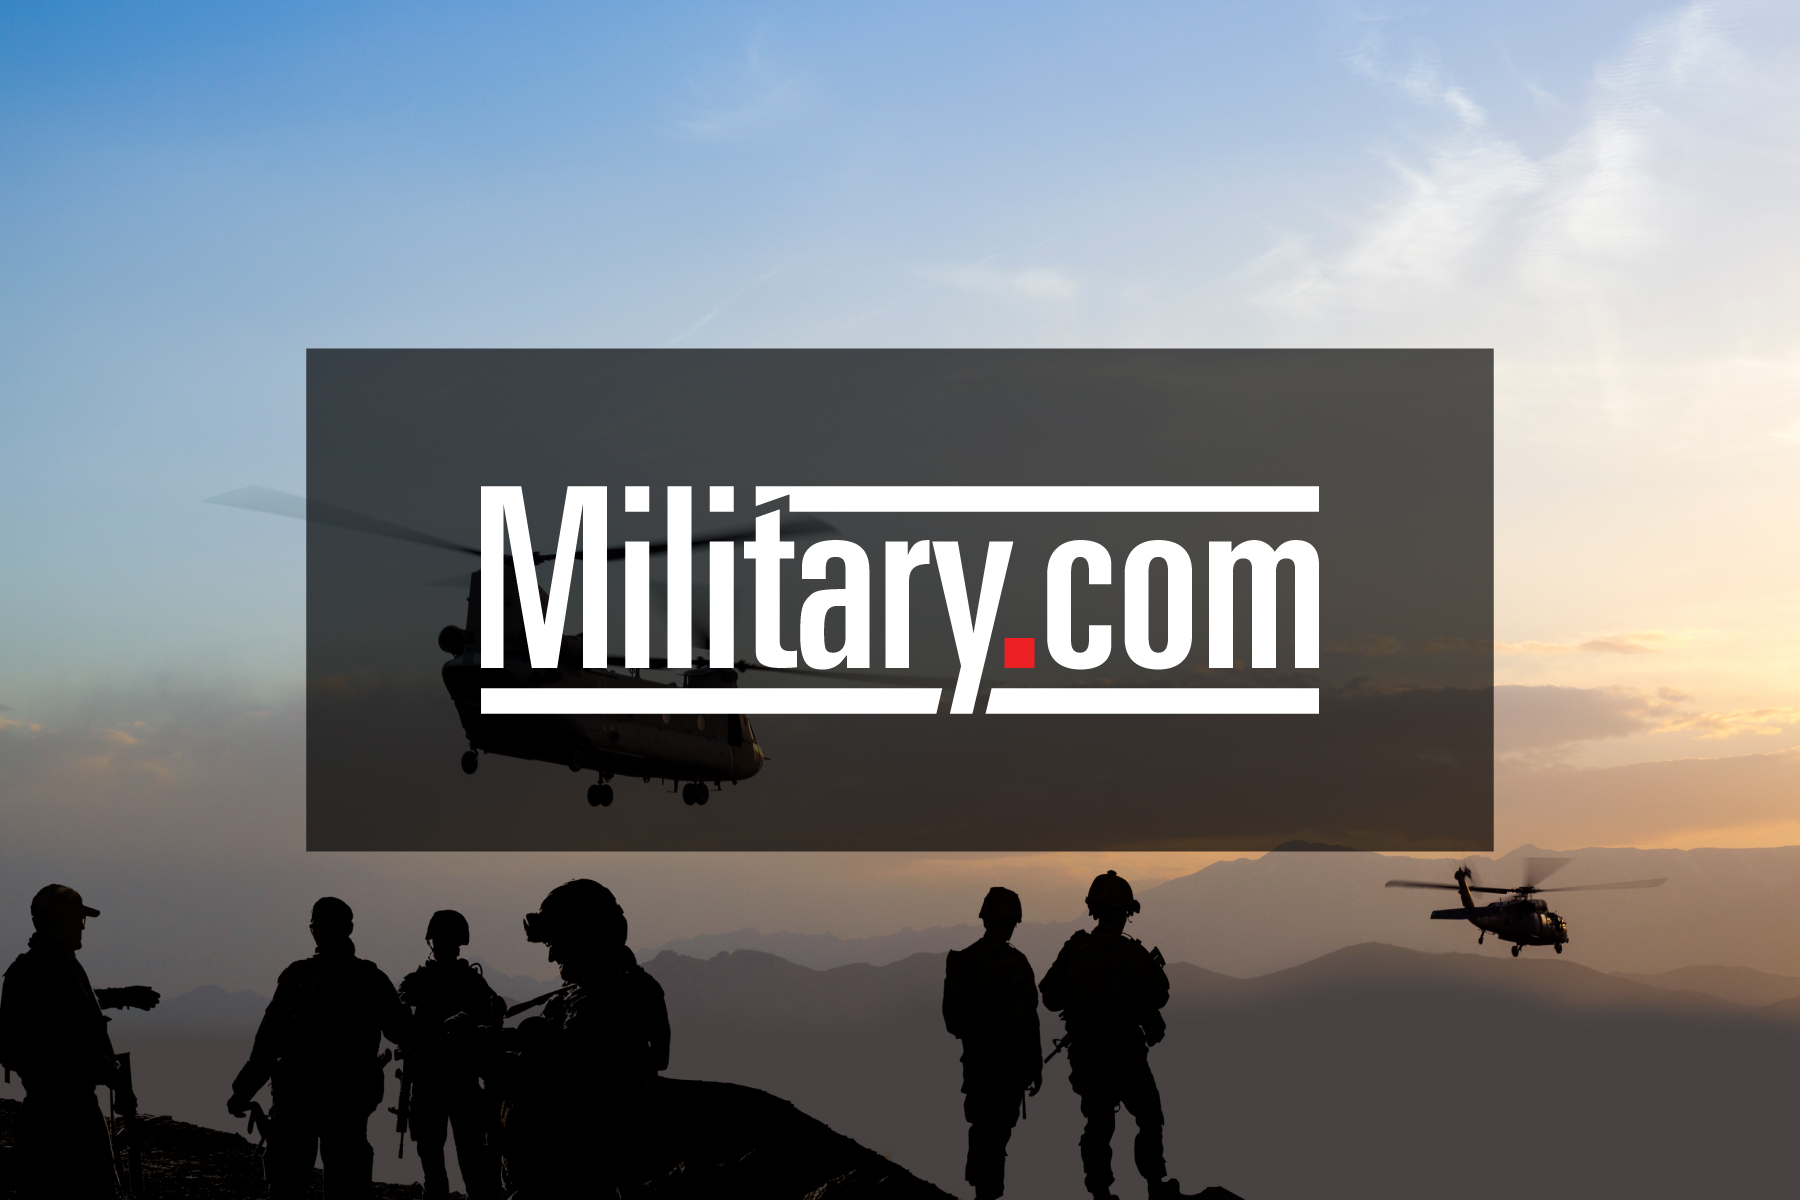 What companies offer loans to U.S. military veterans?